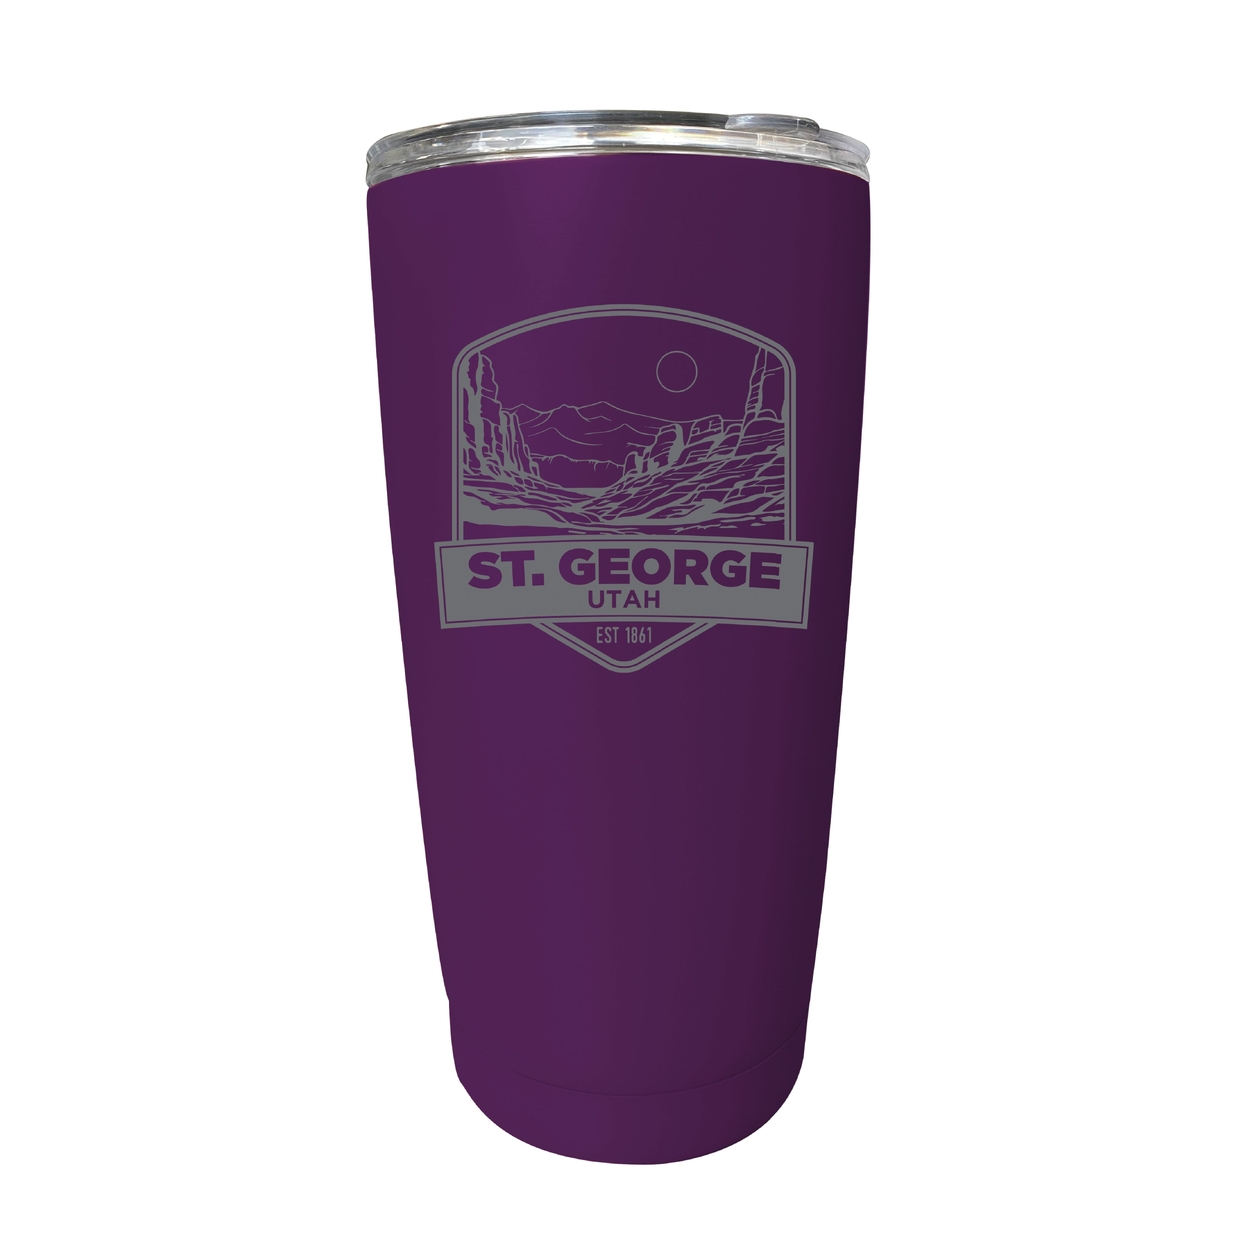 St. George Utah Souvenir 16 Oz Engraved Stainless Steel Insulated Tumbler - White,,4-Pack